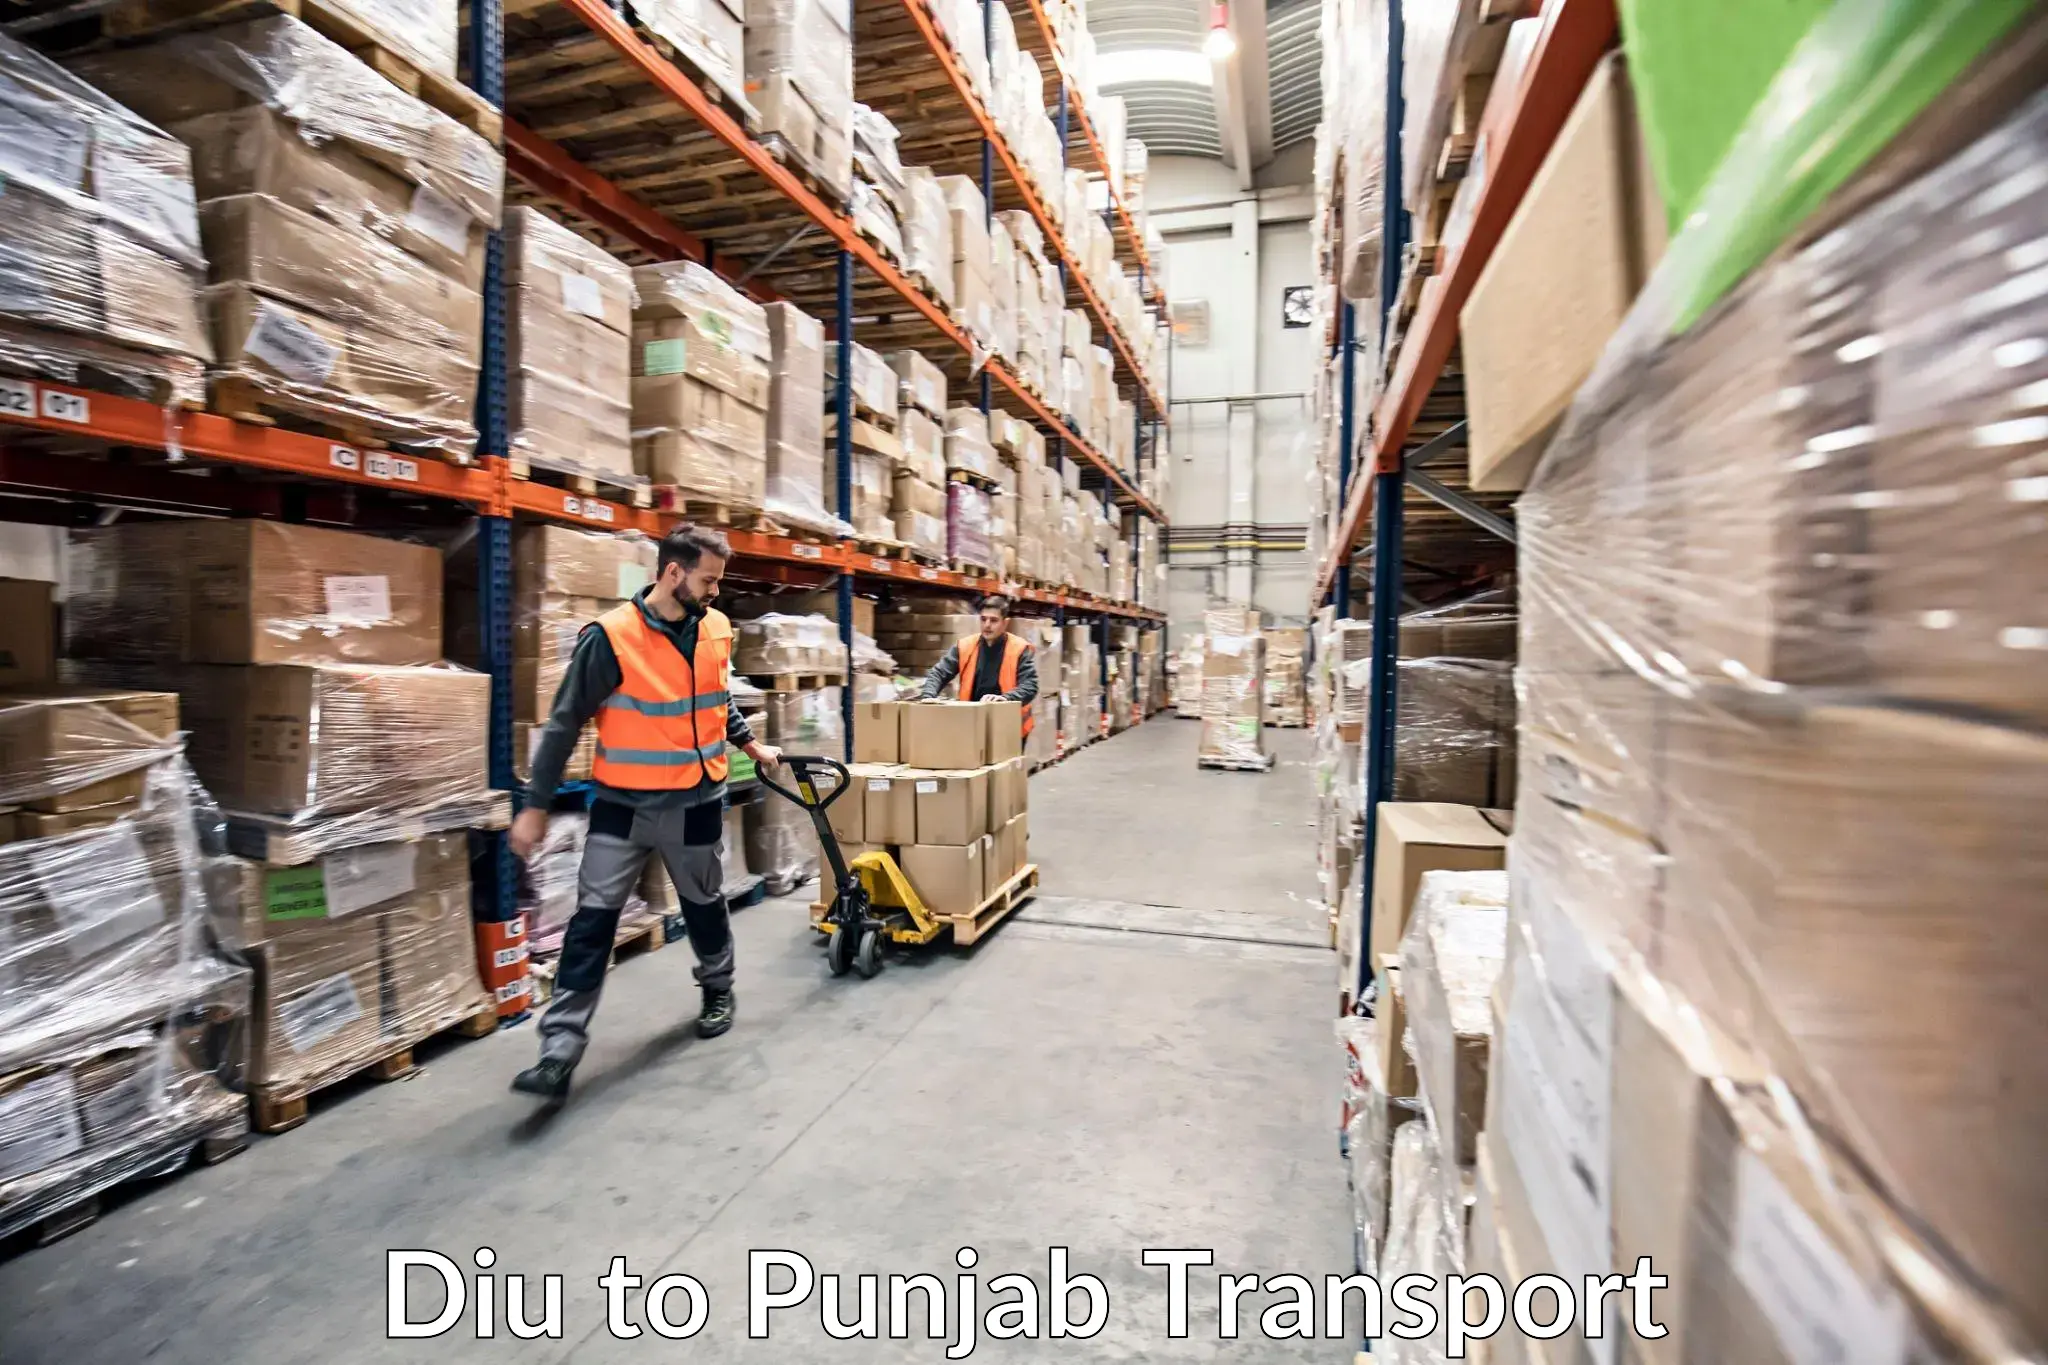 Land transport services Diu to Patiala